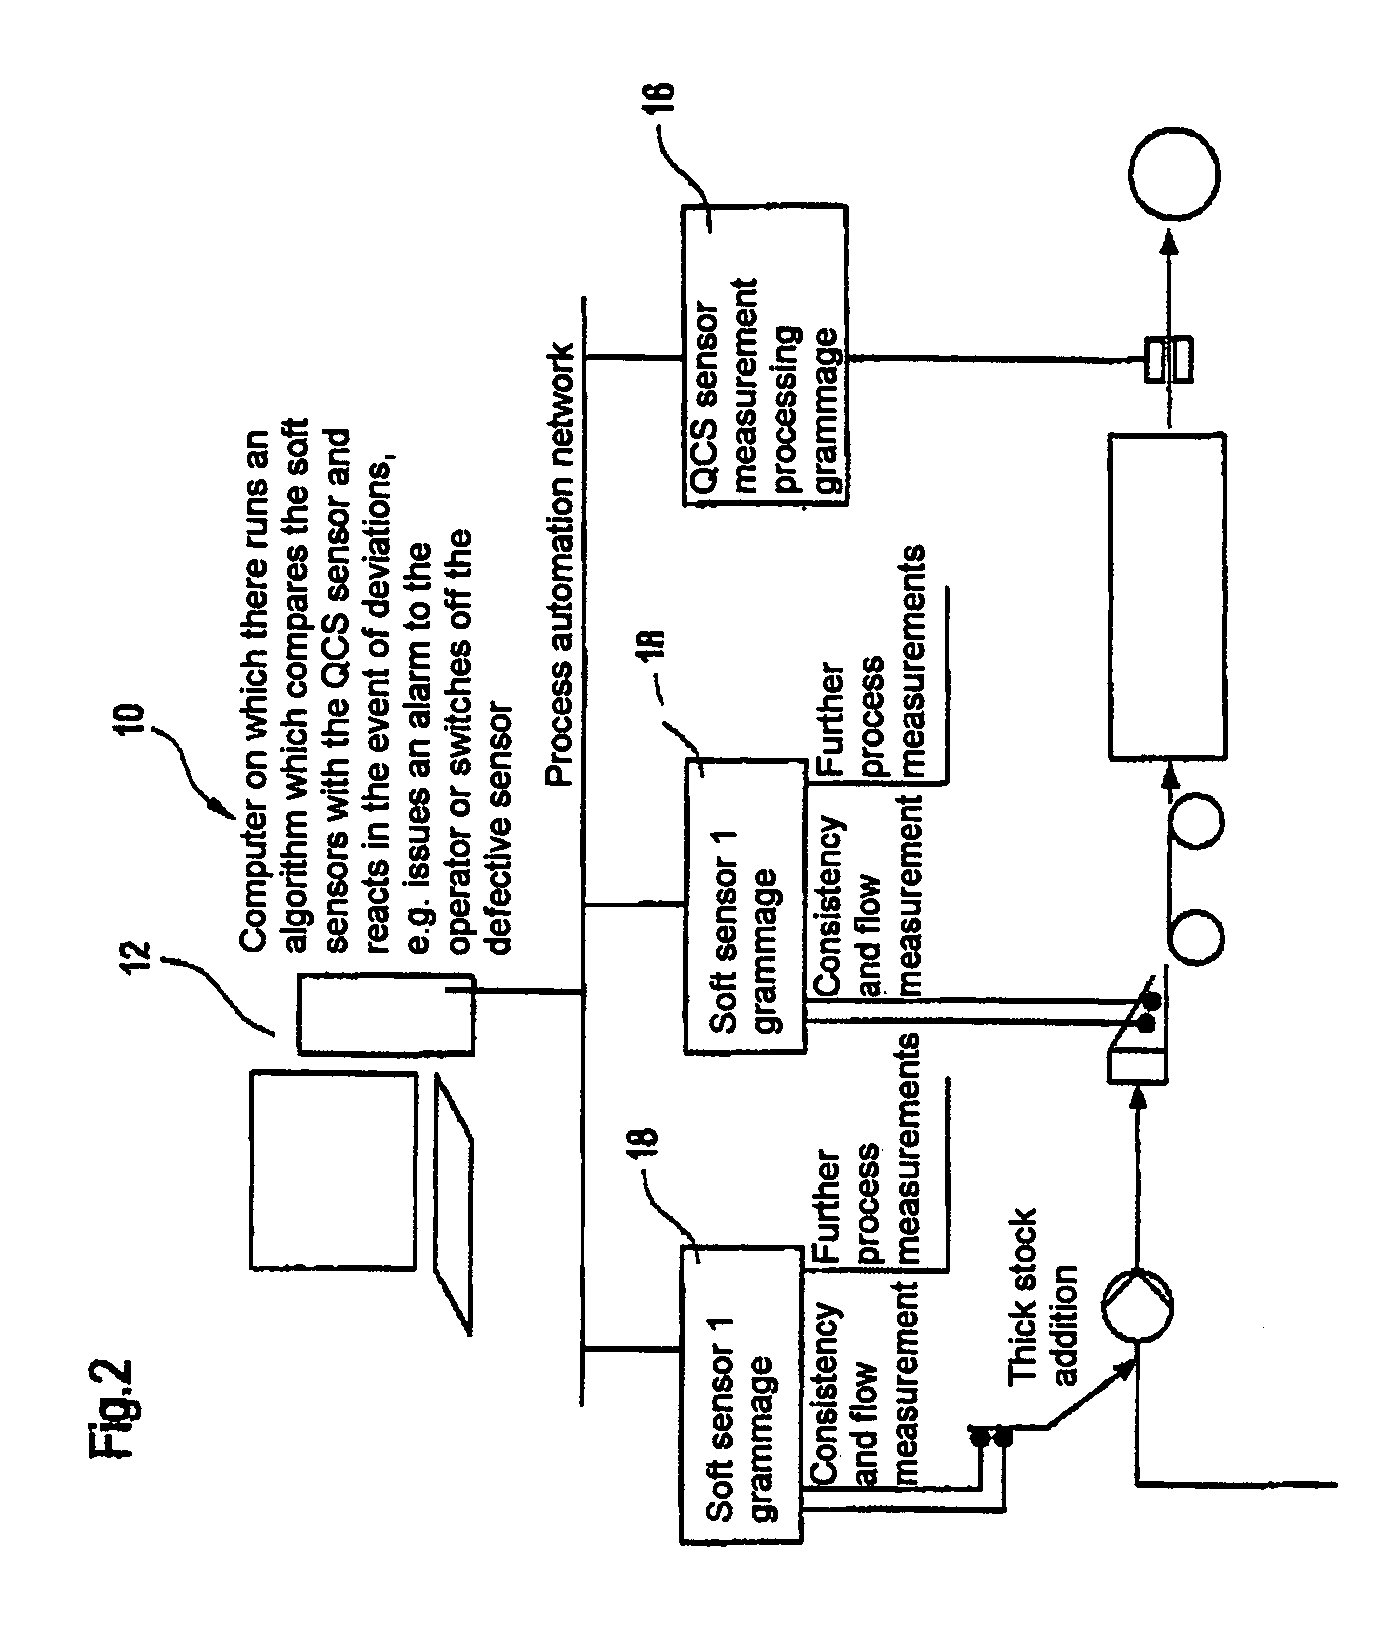 System for computer-aided measurement of quality and/or process data in a paper machine